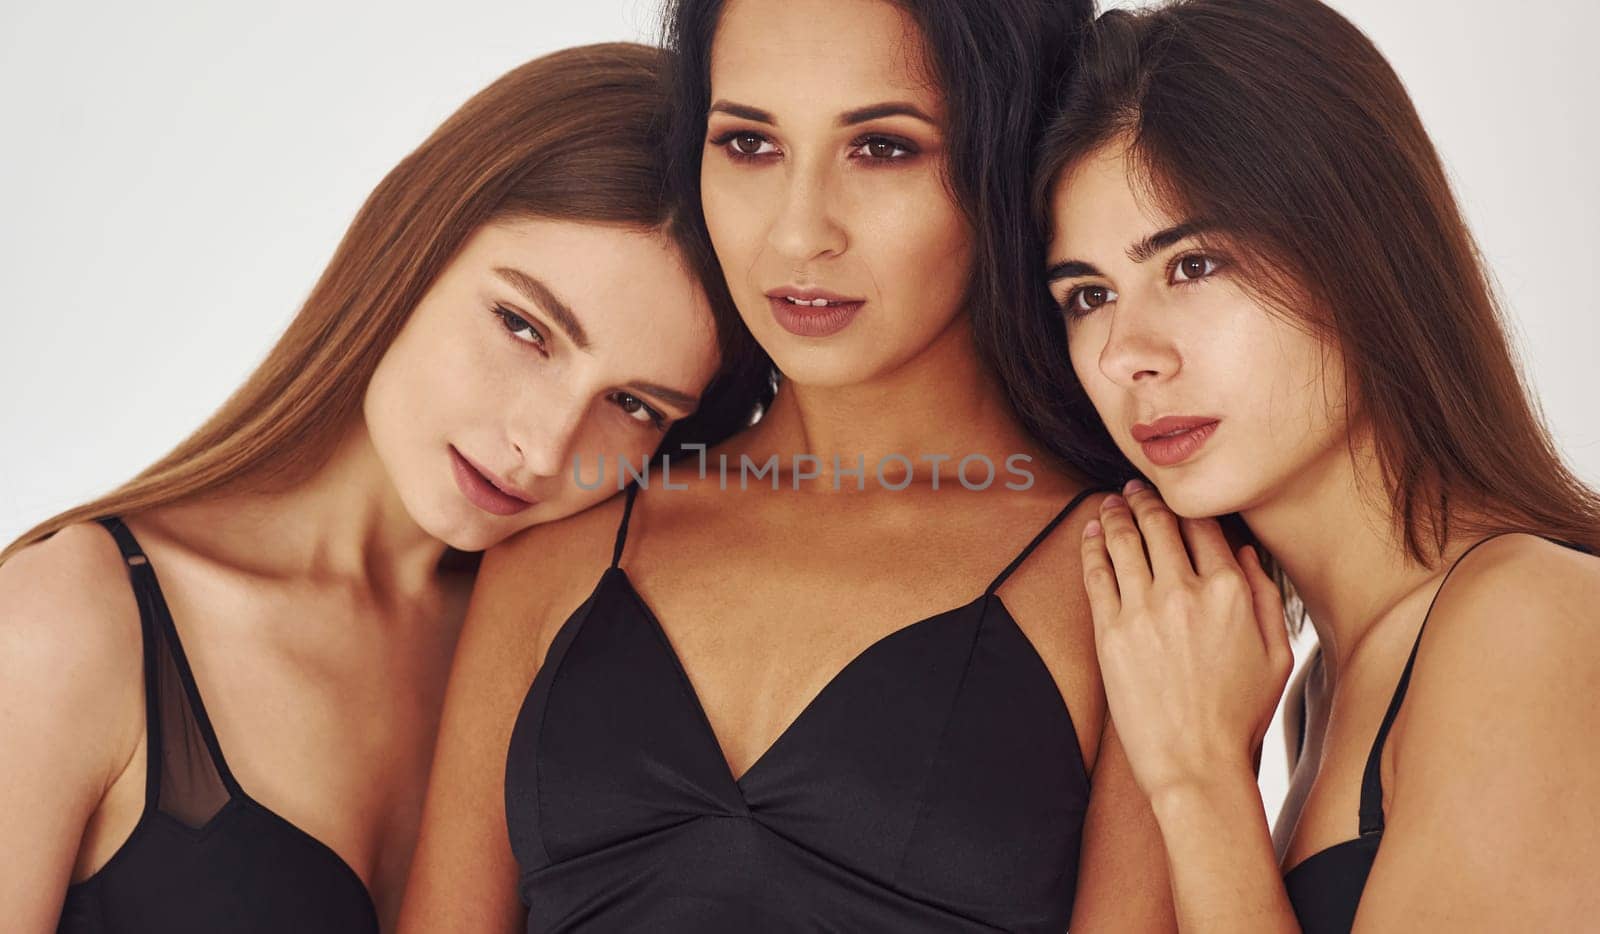 Three young women in lingerie together indoors. White background by Standret